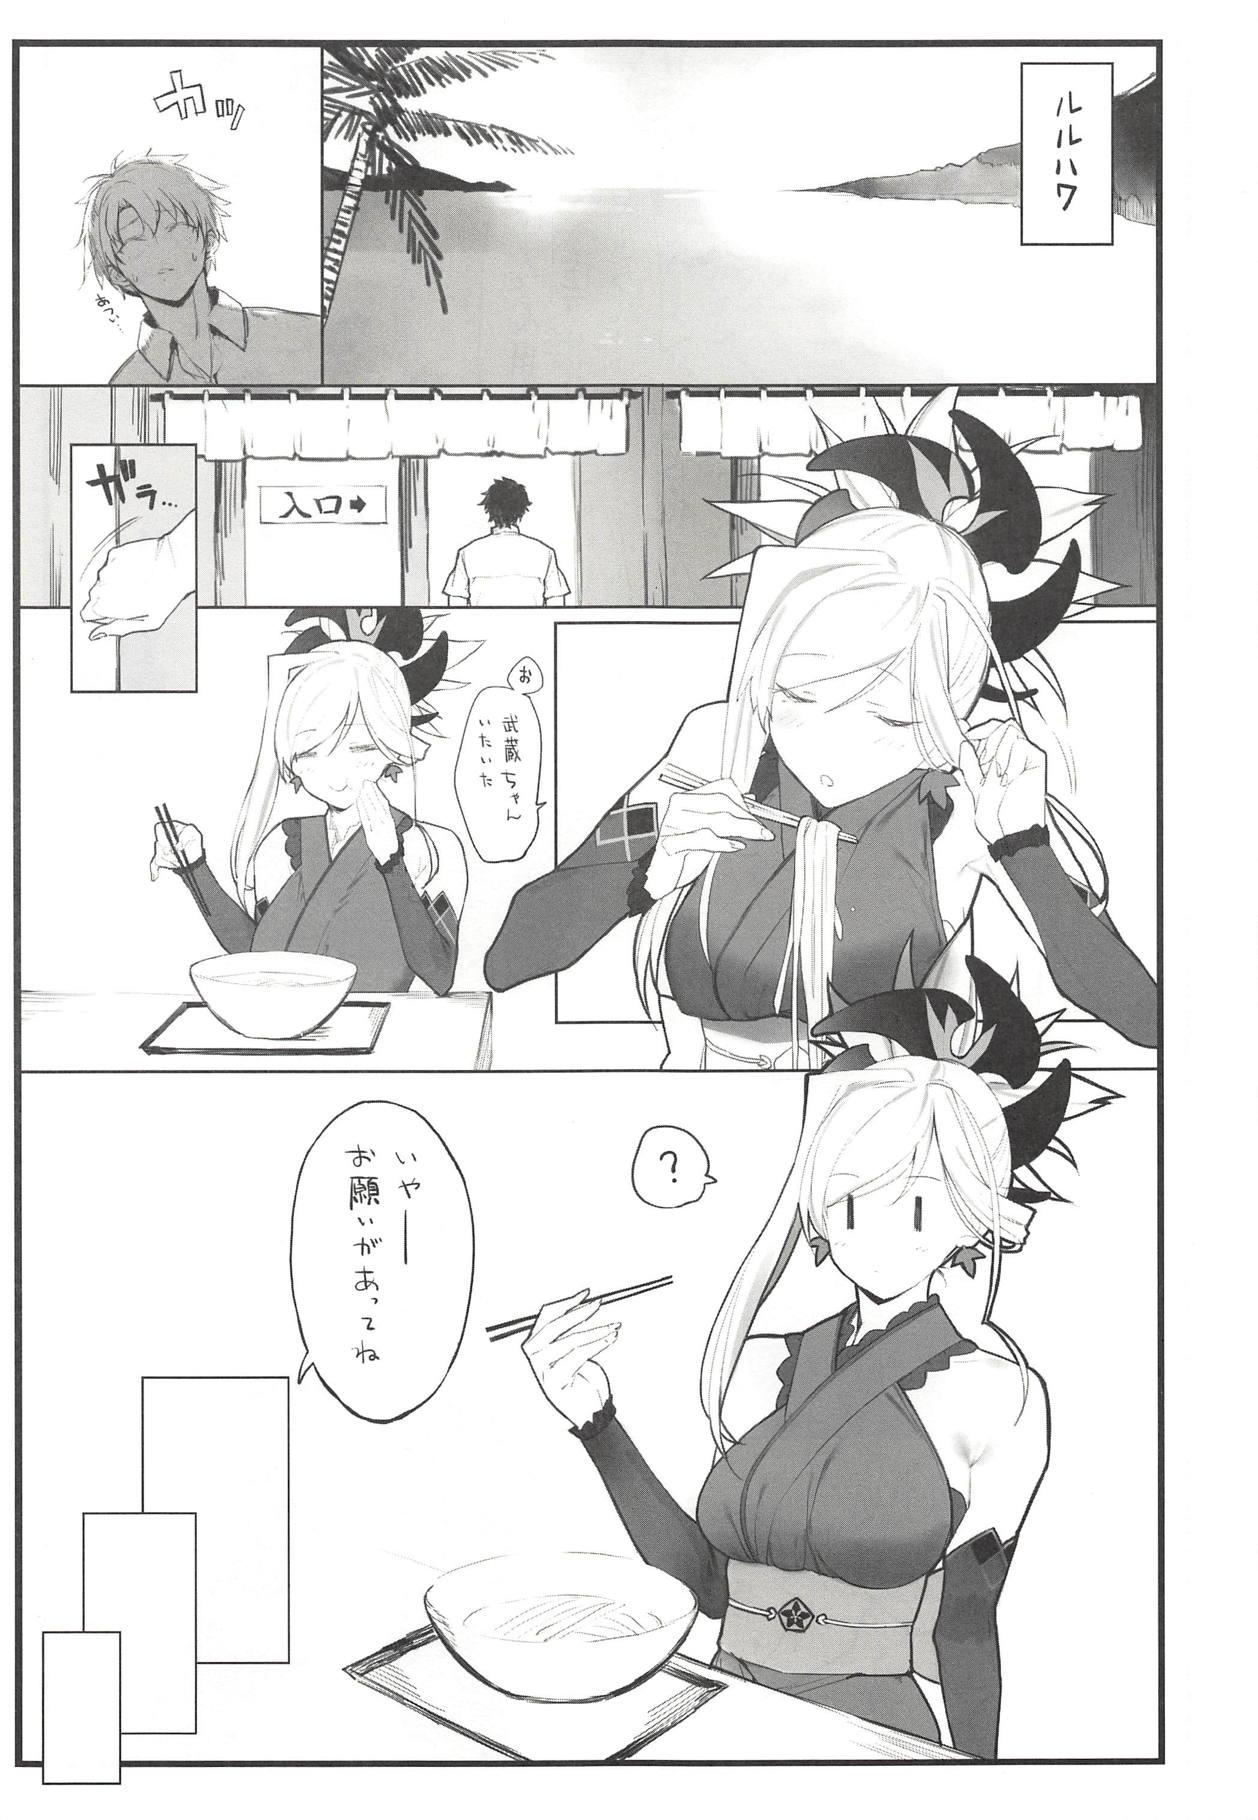 Breasts Musashi-chan no Hon - Fate grand order Chastity - Page 2